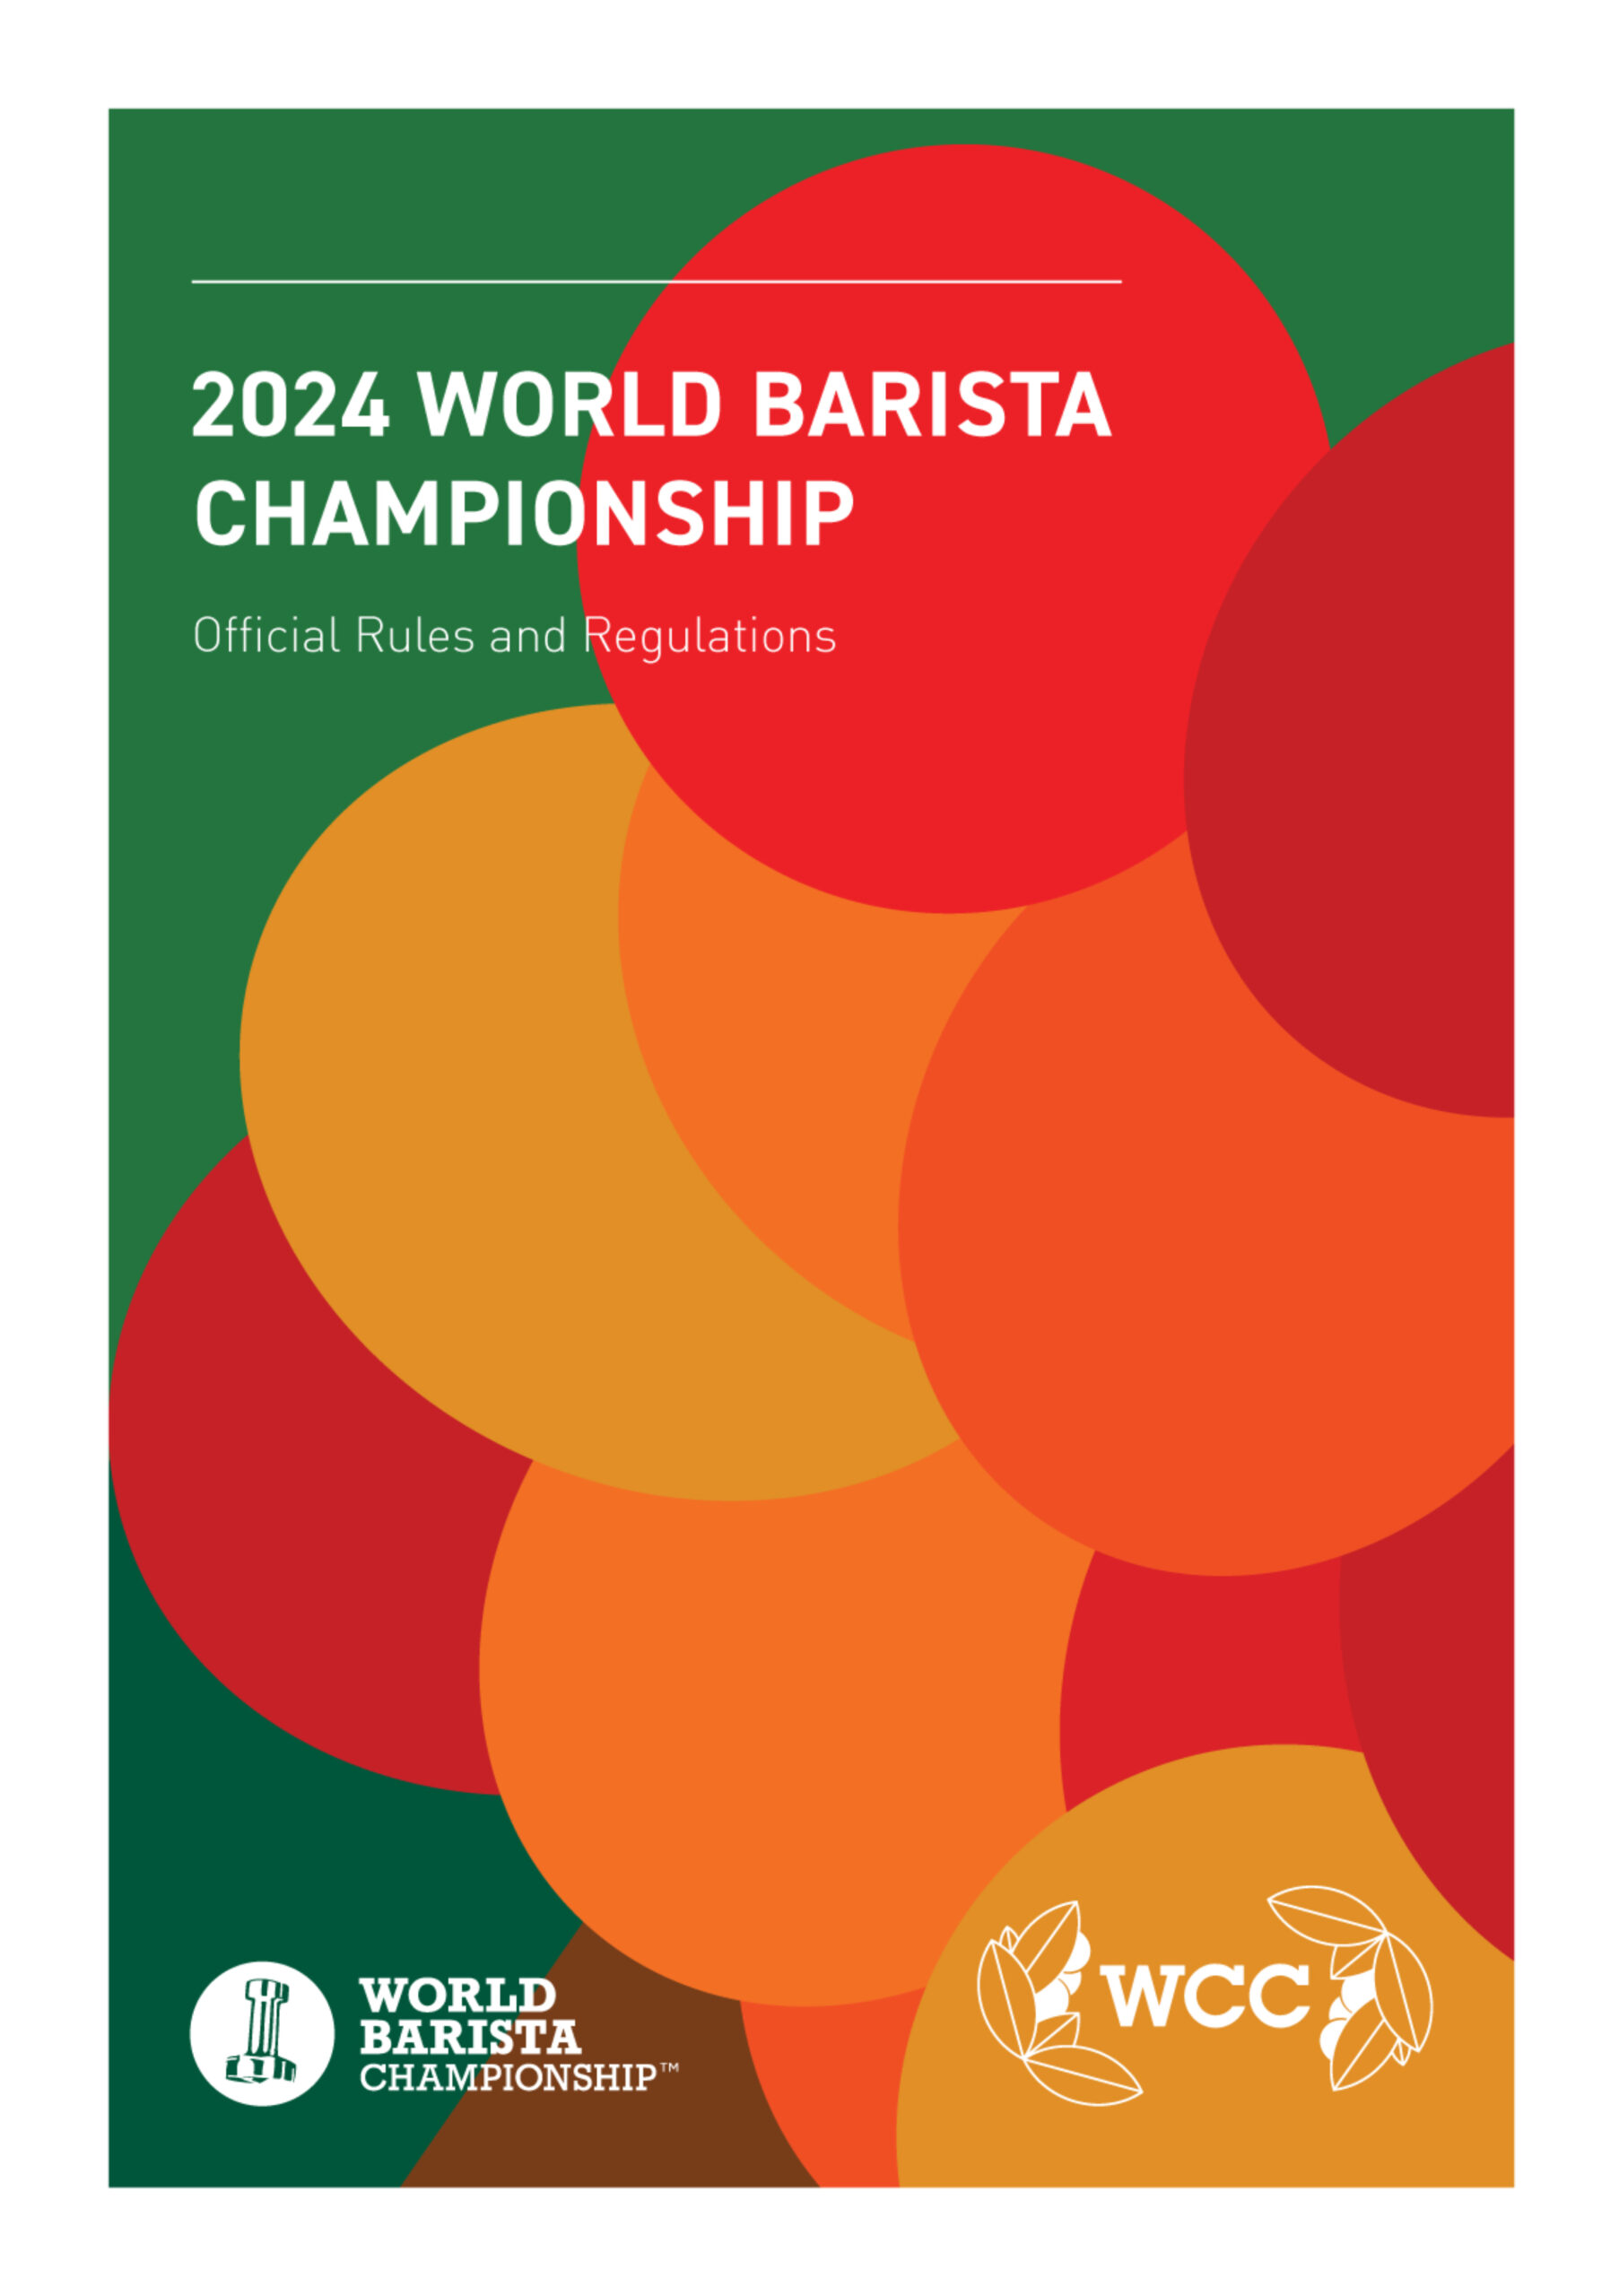 Crucial changes to the rules of the 2024 World Barista Championship